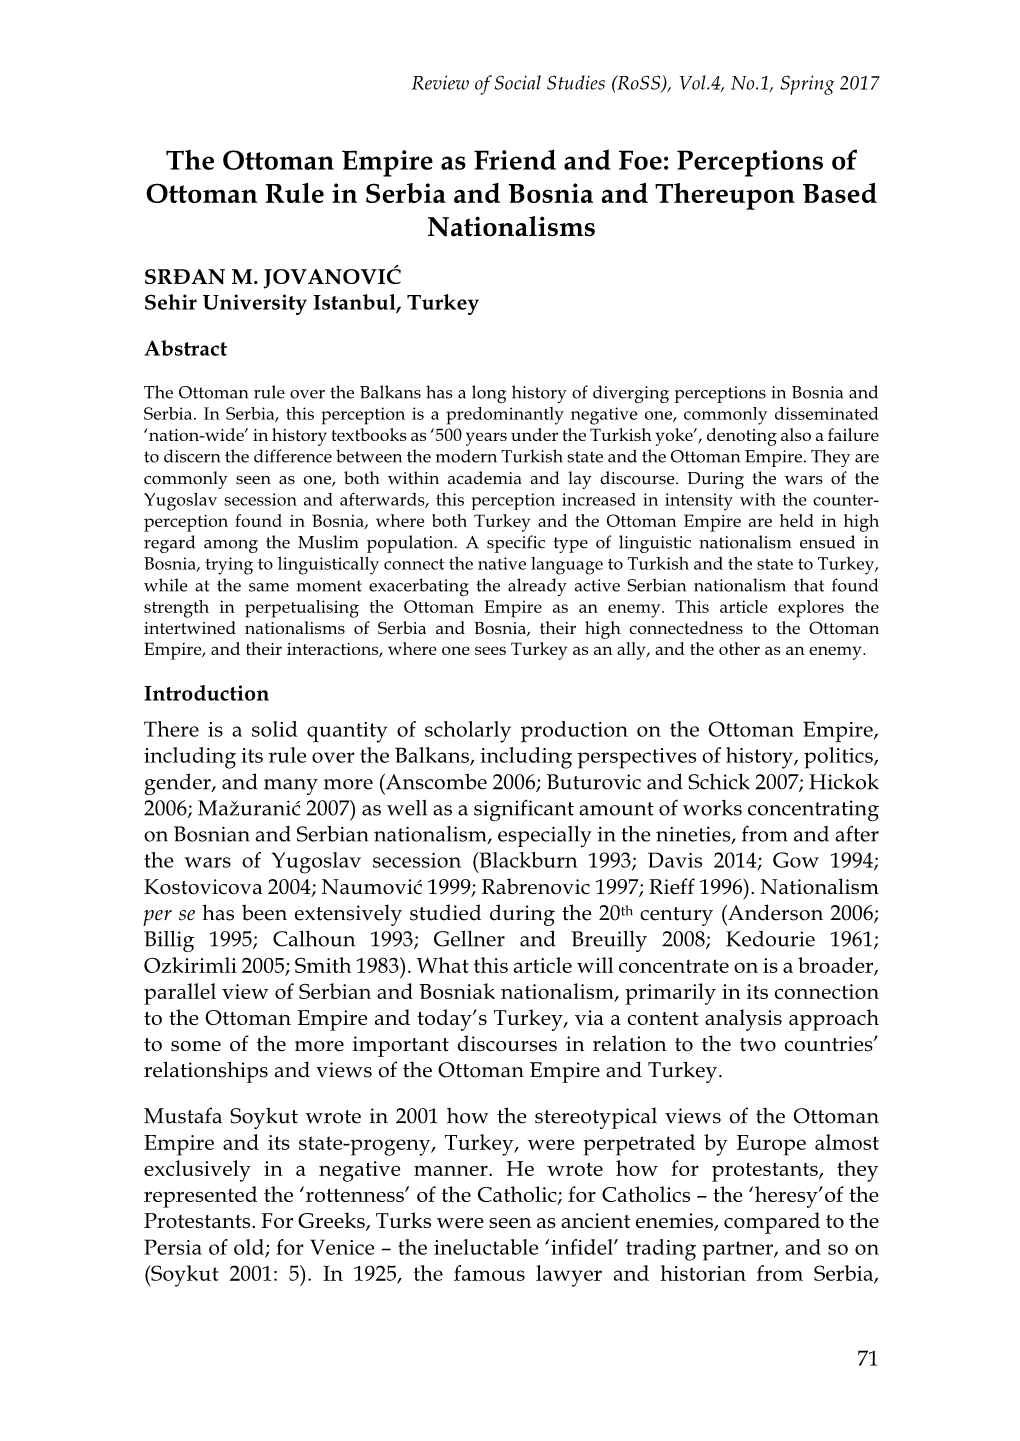 The Ottoman Empire As Friend and Foe: Perceptions of Ottoman Rule in Serbia and Bosnia and Thereupon Based Nationalisms